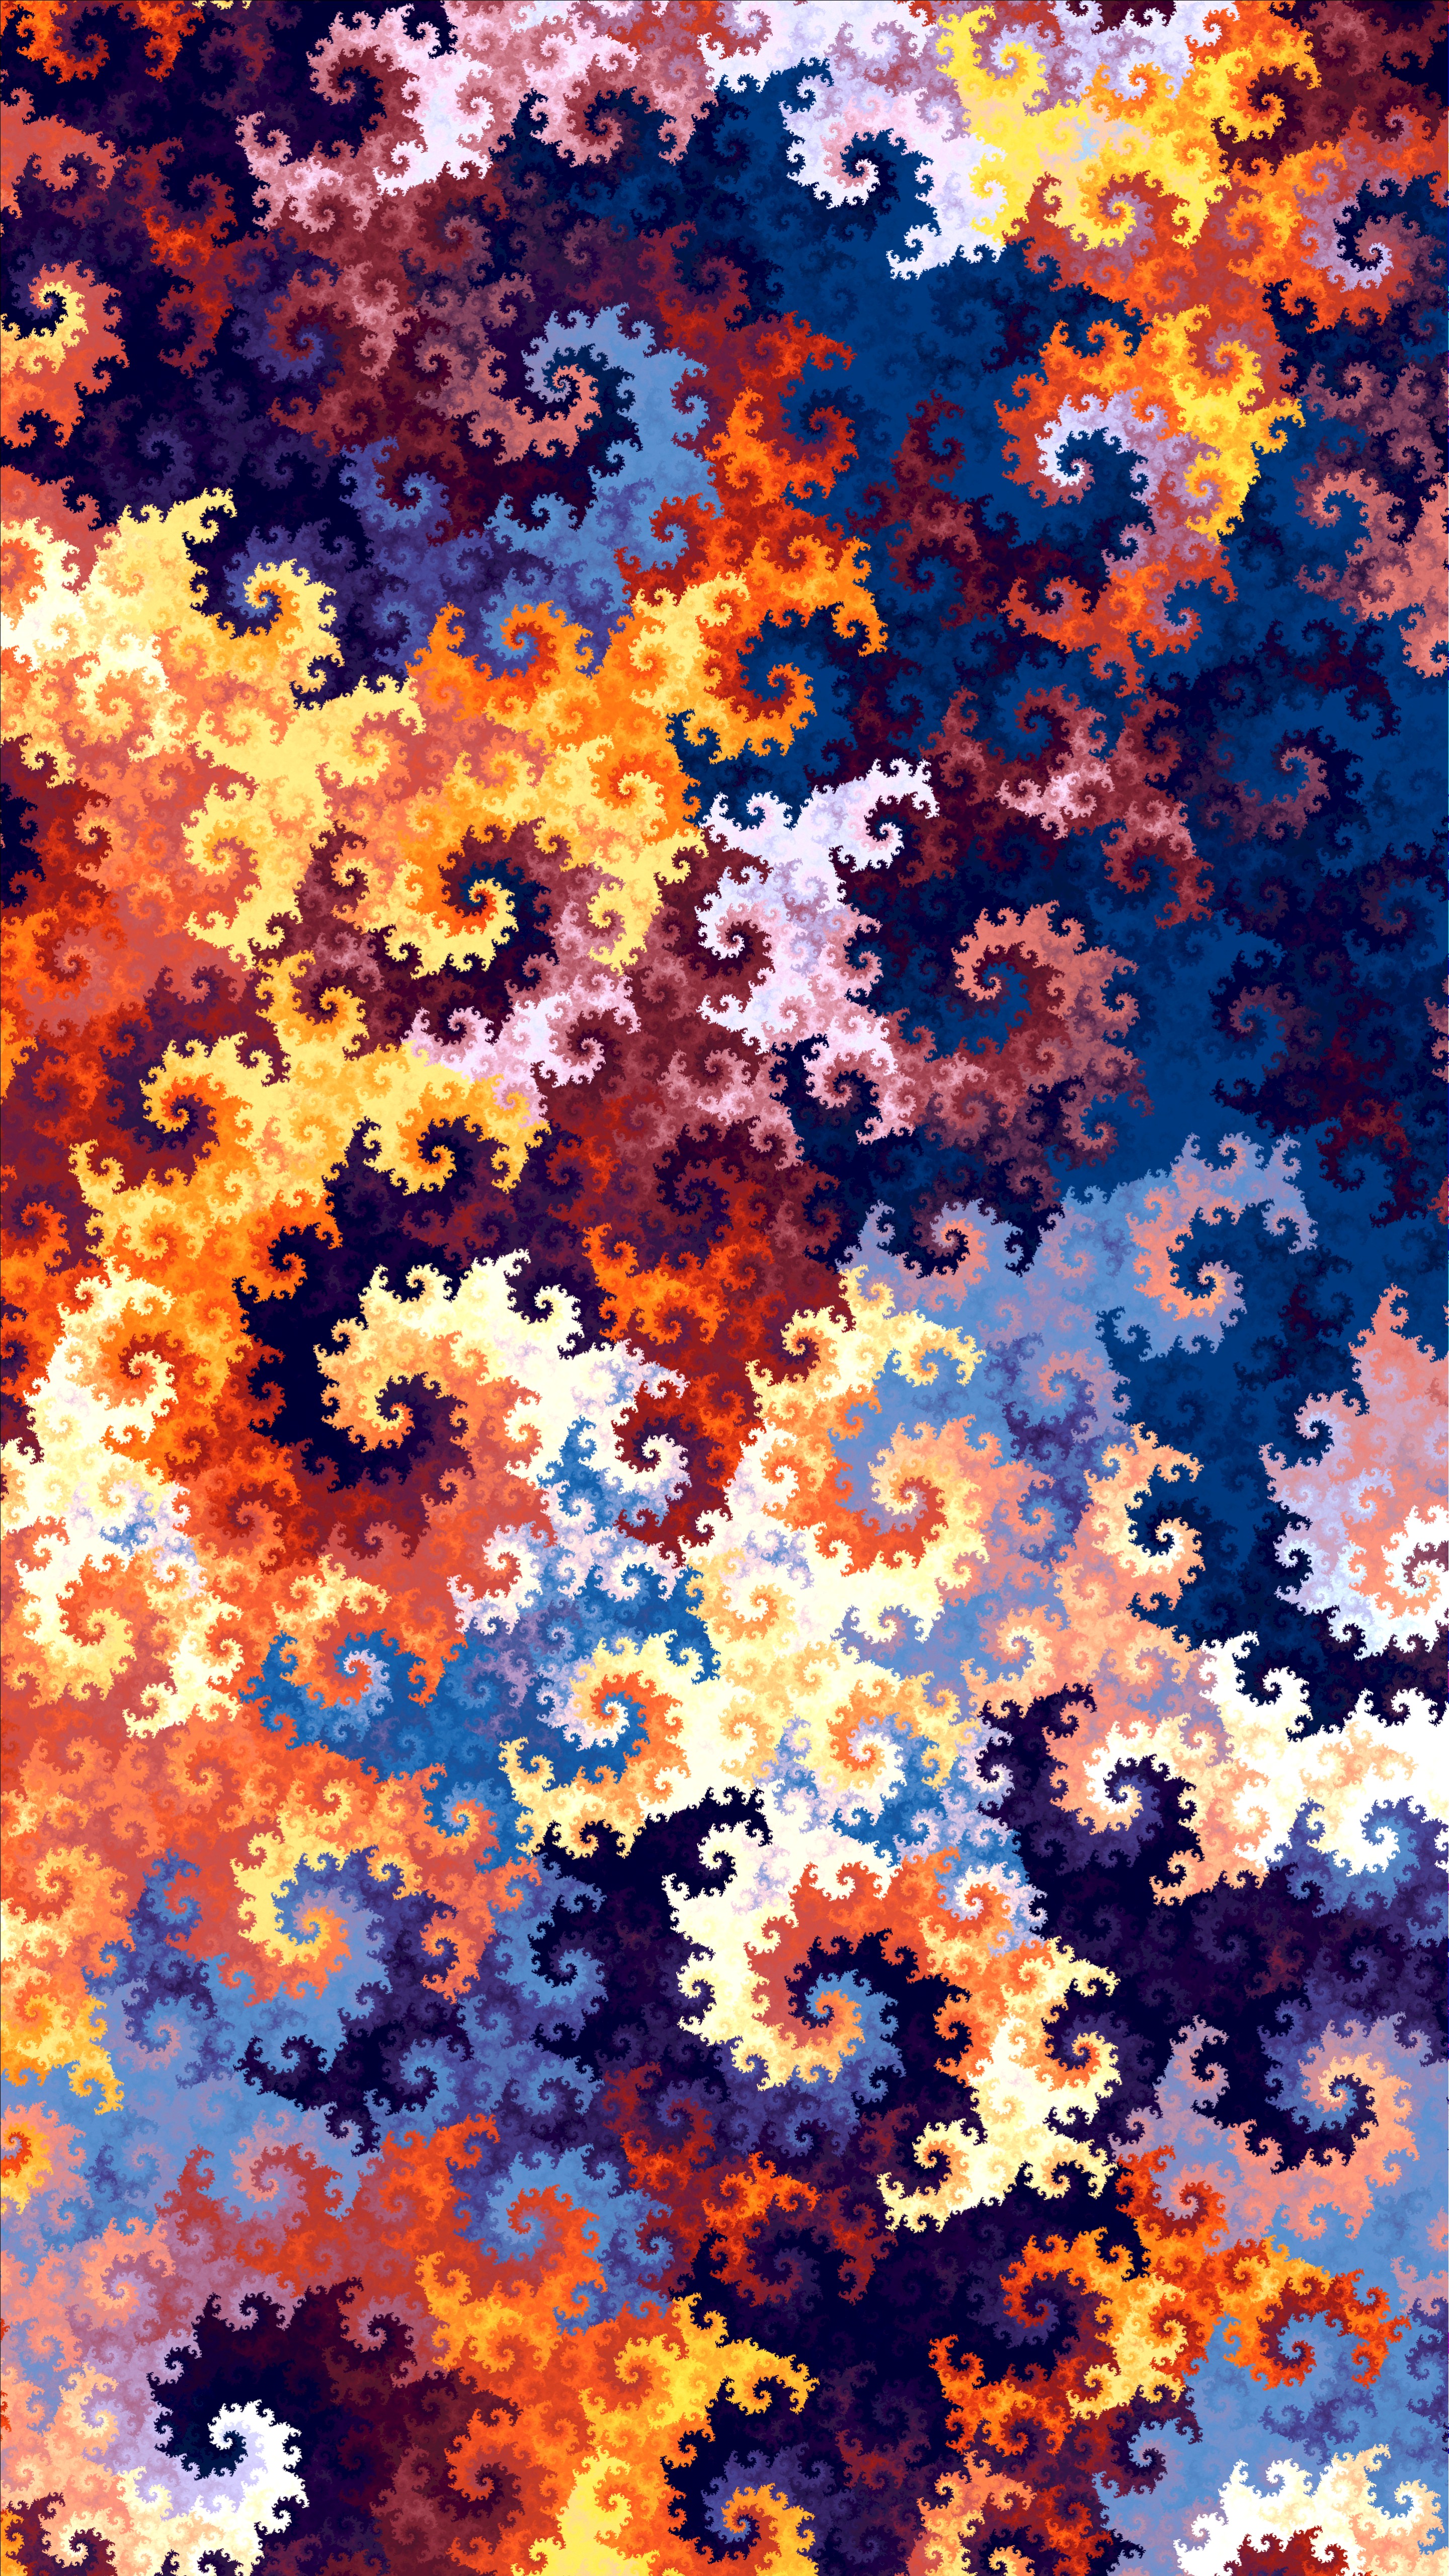 pattern, patterns, textures, multicolored, motley, texture, spiral, spirals, swirling, involute